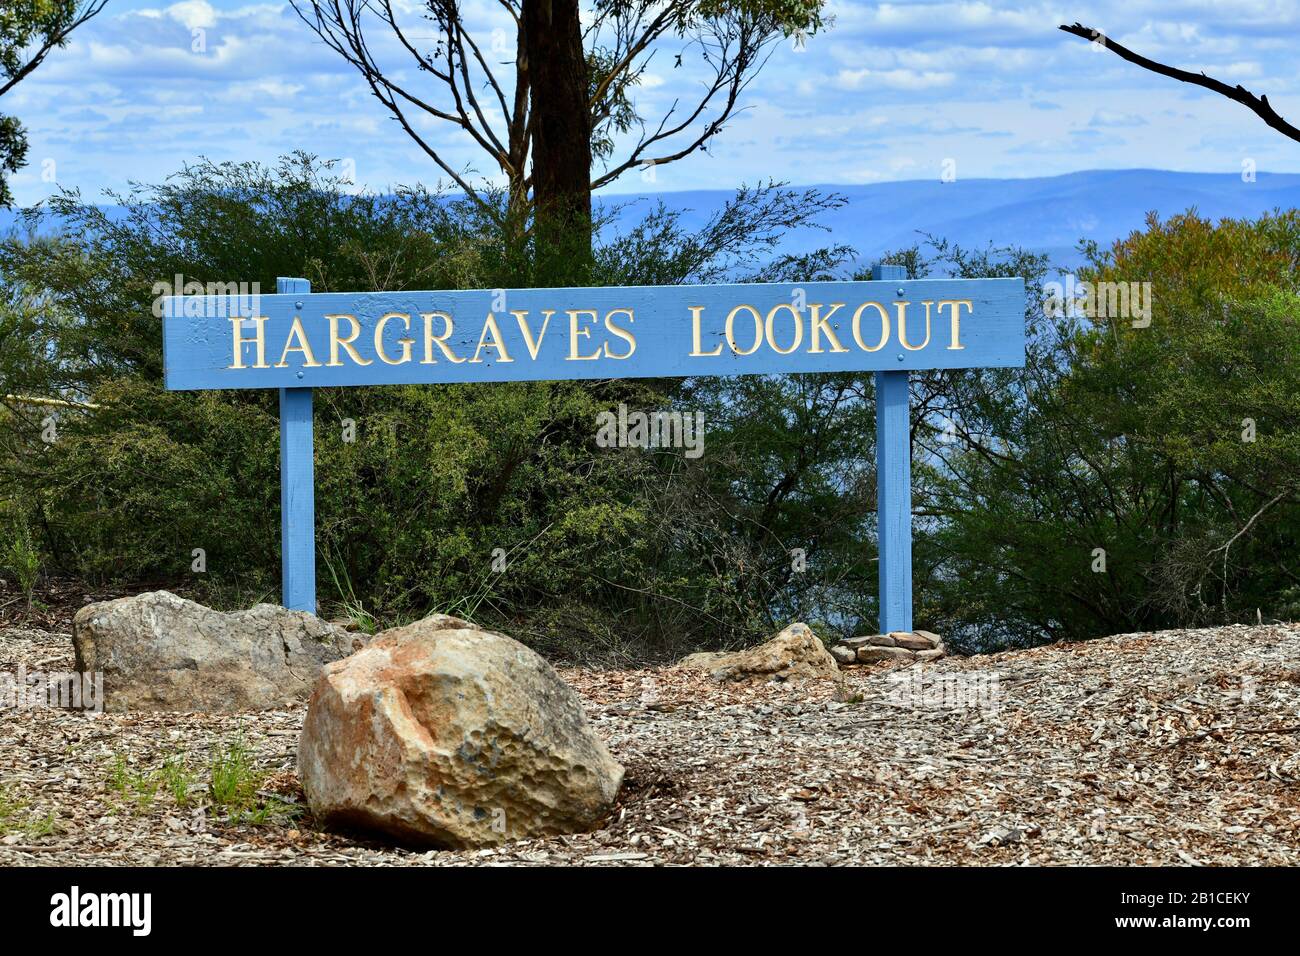 Hargraves Lookout at Blackheath west of Sydney Stock Photo